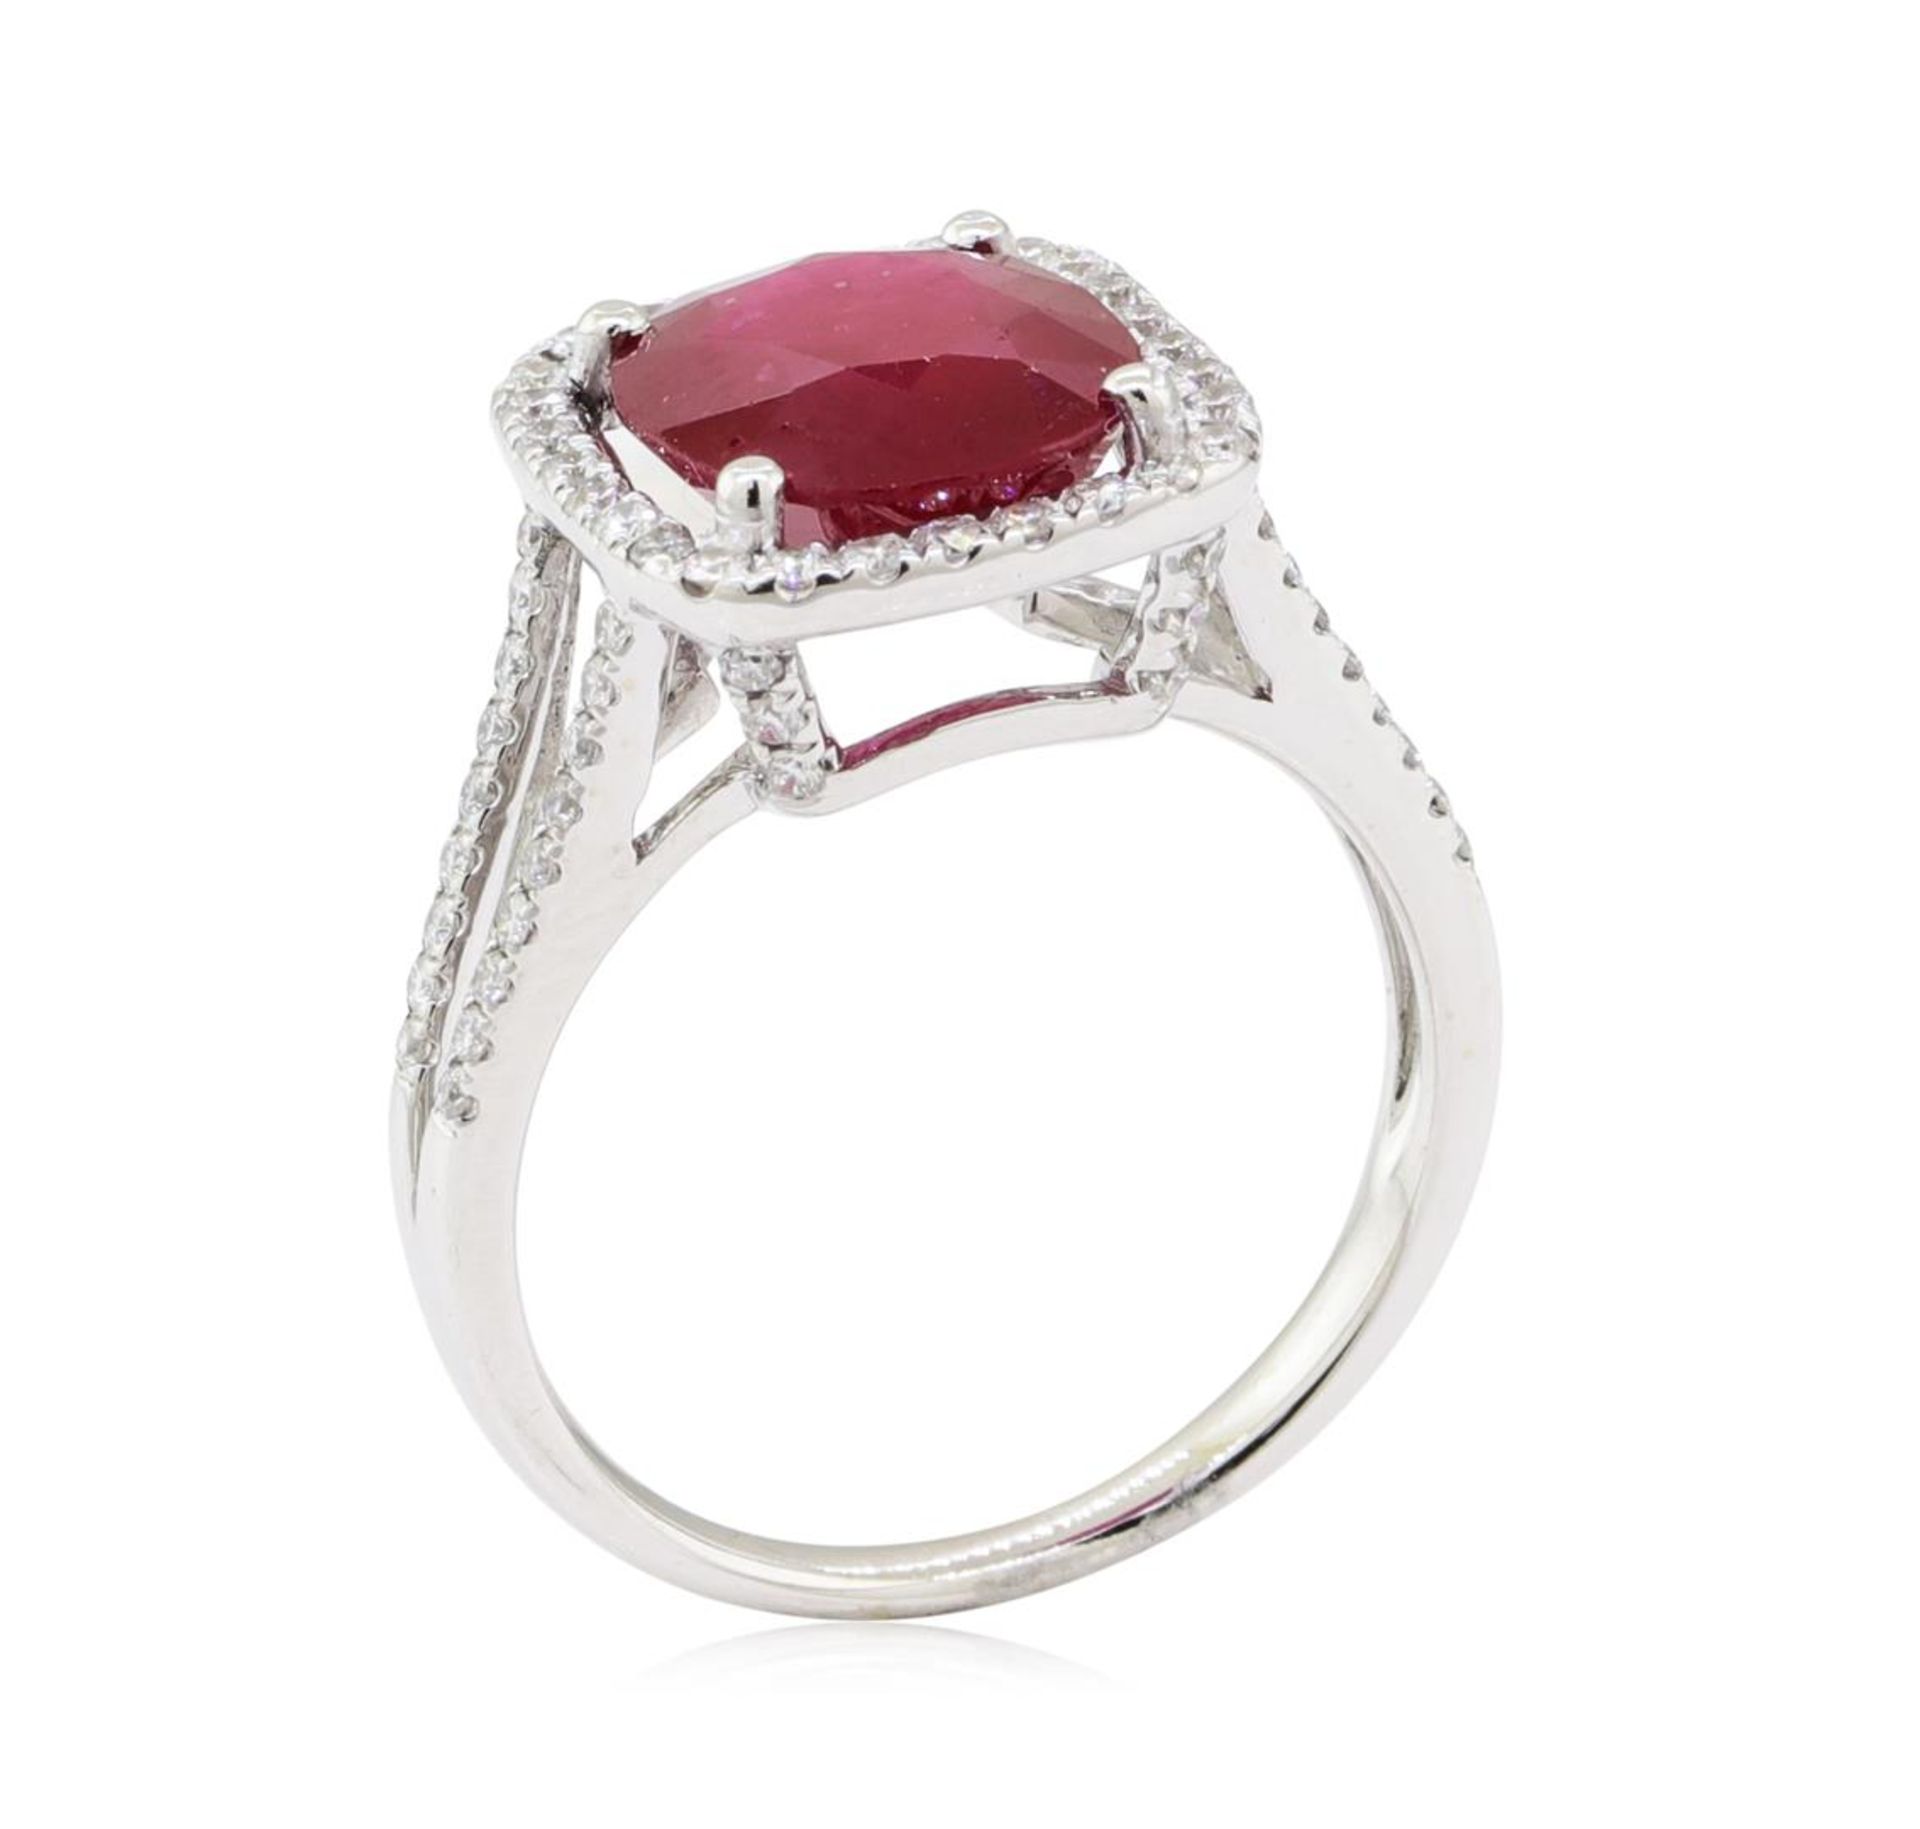 4.40 ctw Ruby and Diamond Ring - 18KT White Gold - Image 4 of 5